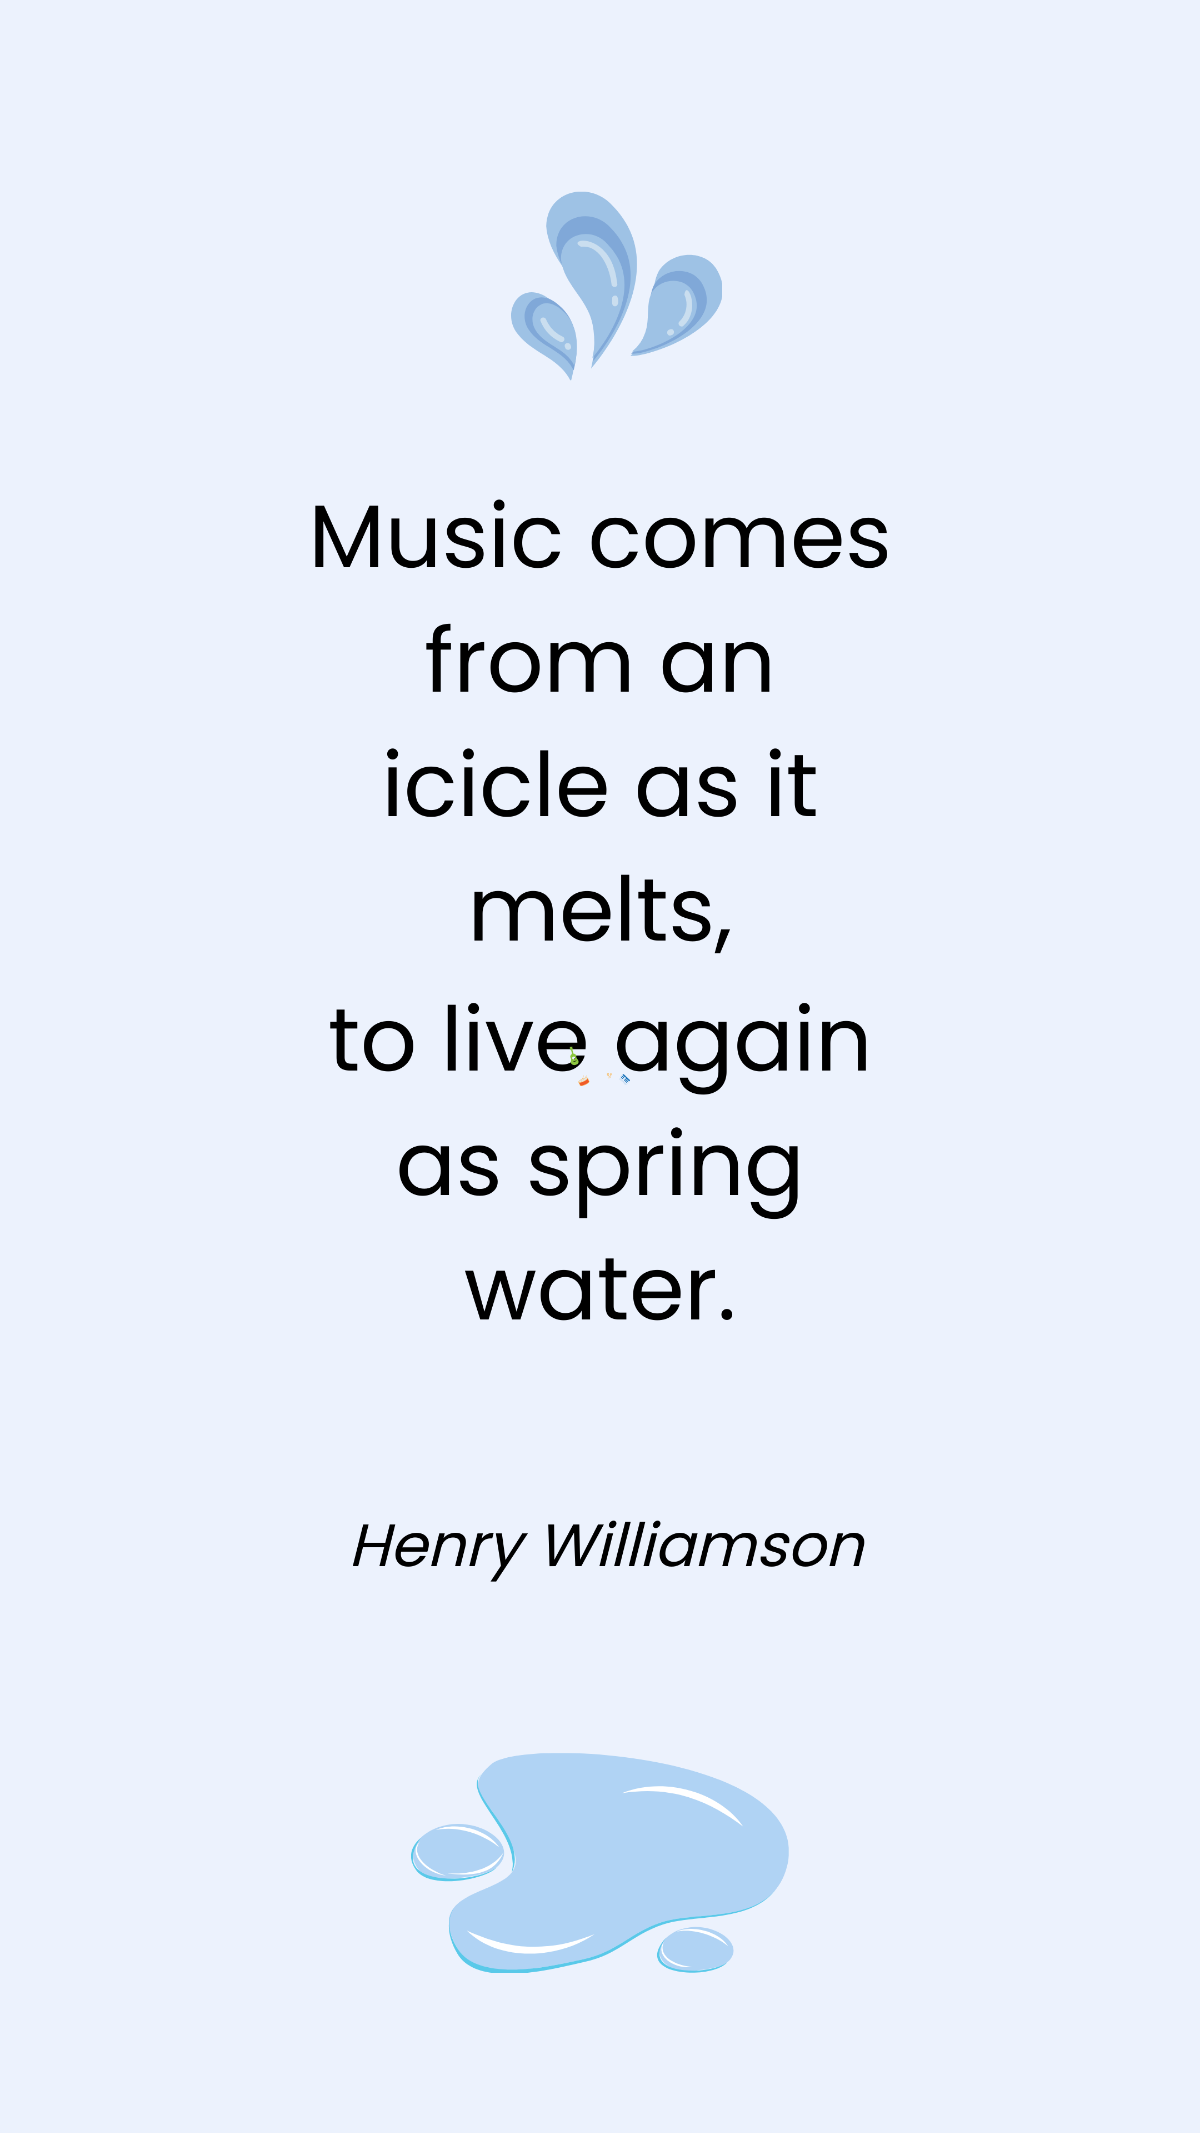 Free Henry Williamson - Music comes from an icicle as it melts, to live again as spring water. Template